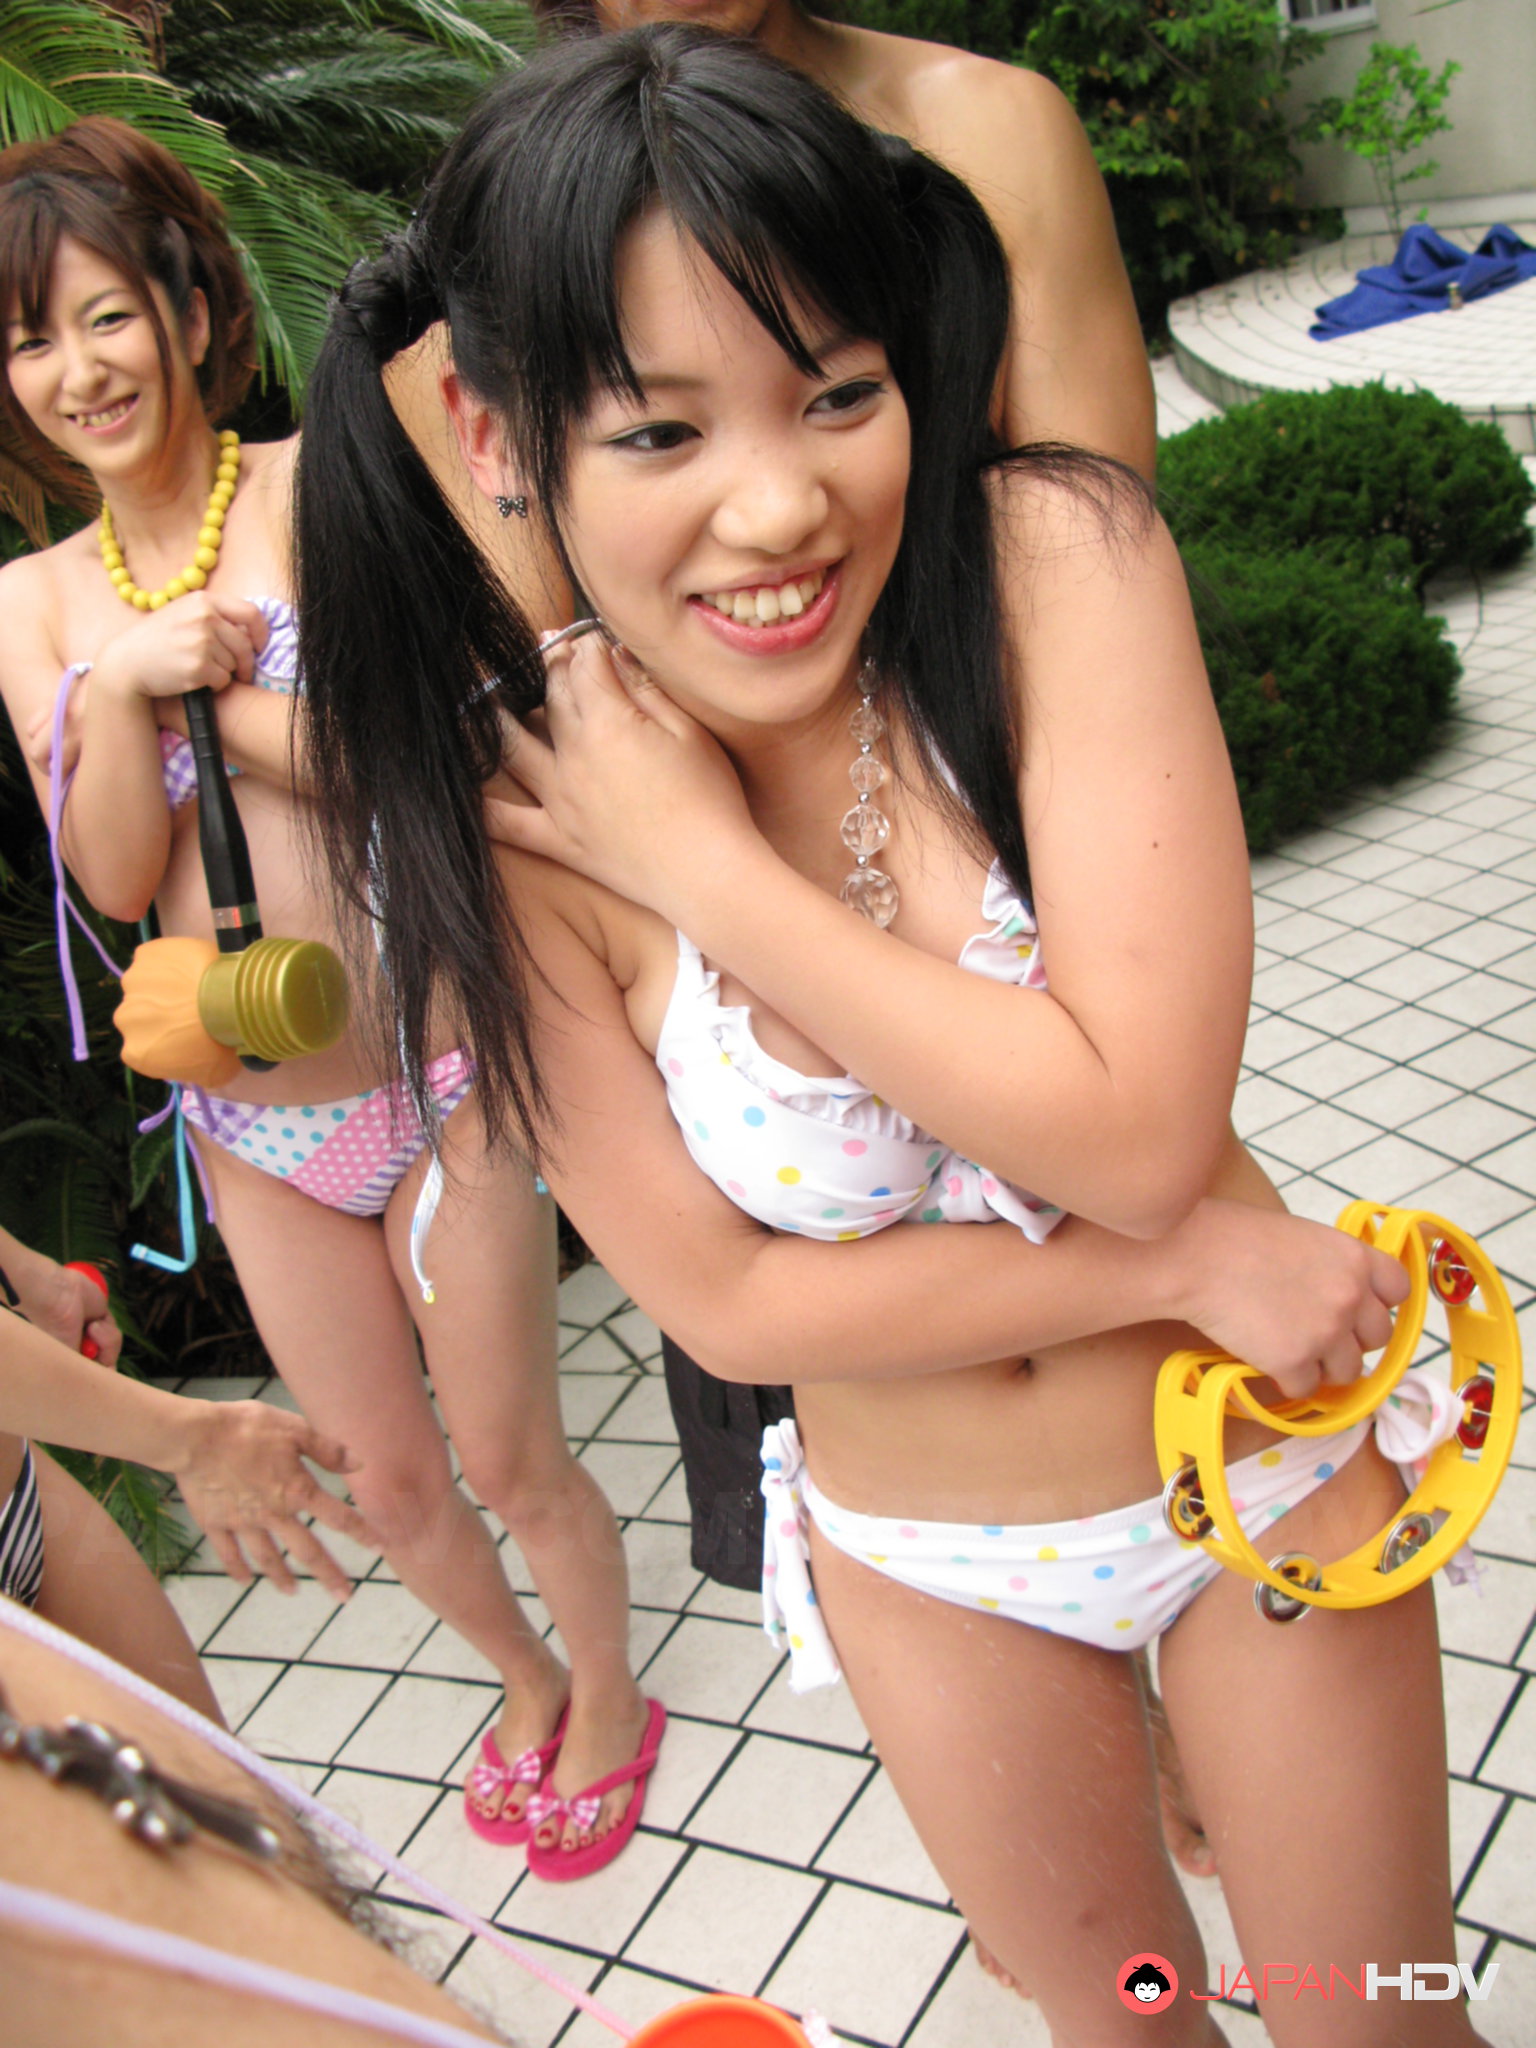 Freaky Japanese Porn - Japanhdv Japanhdv Girl Really Sexy Japanese Pool Party Nude Gallery